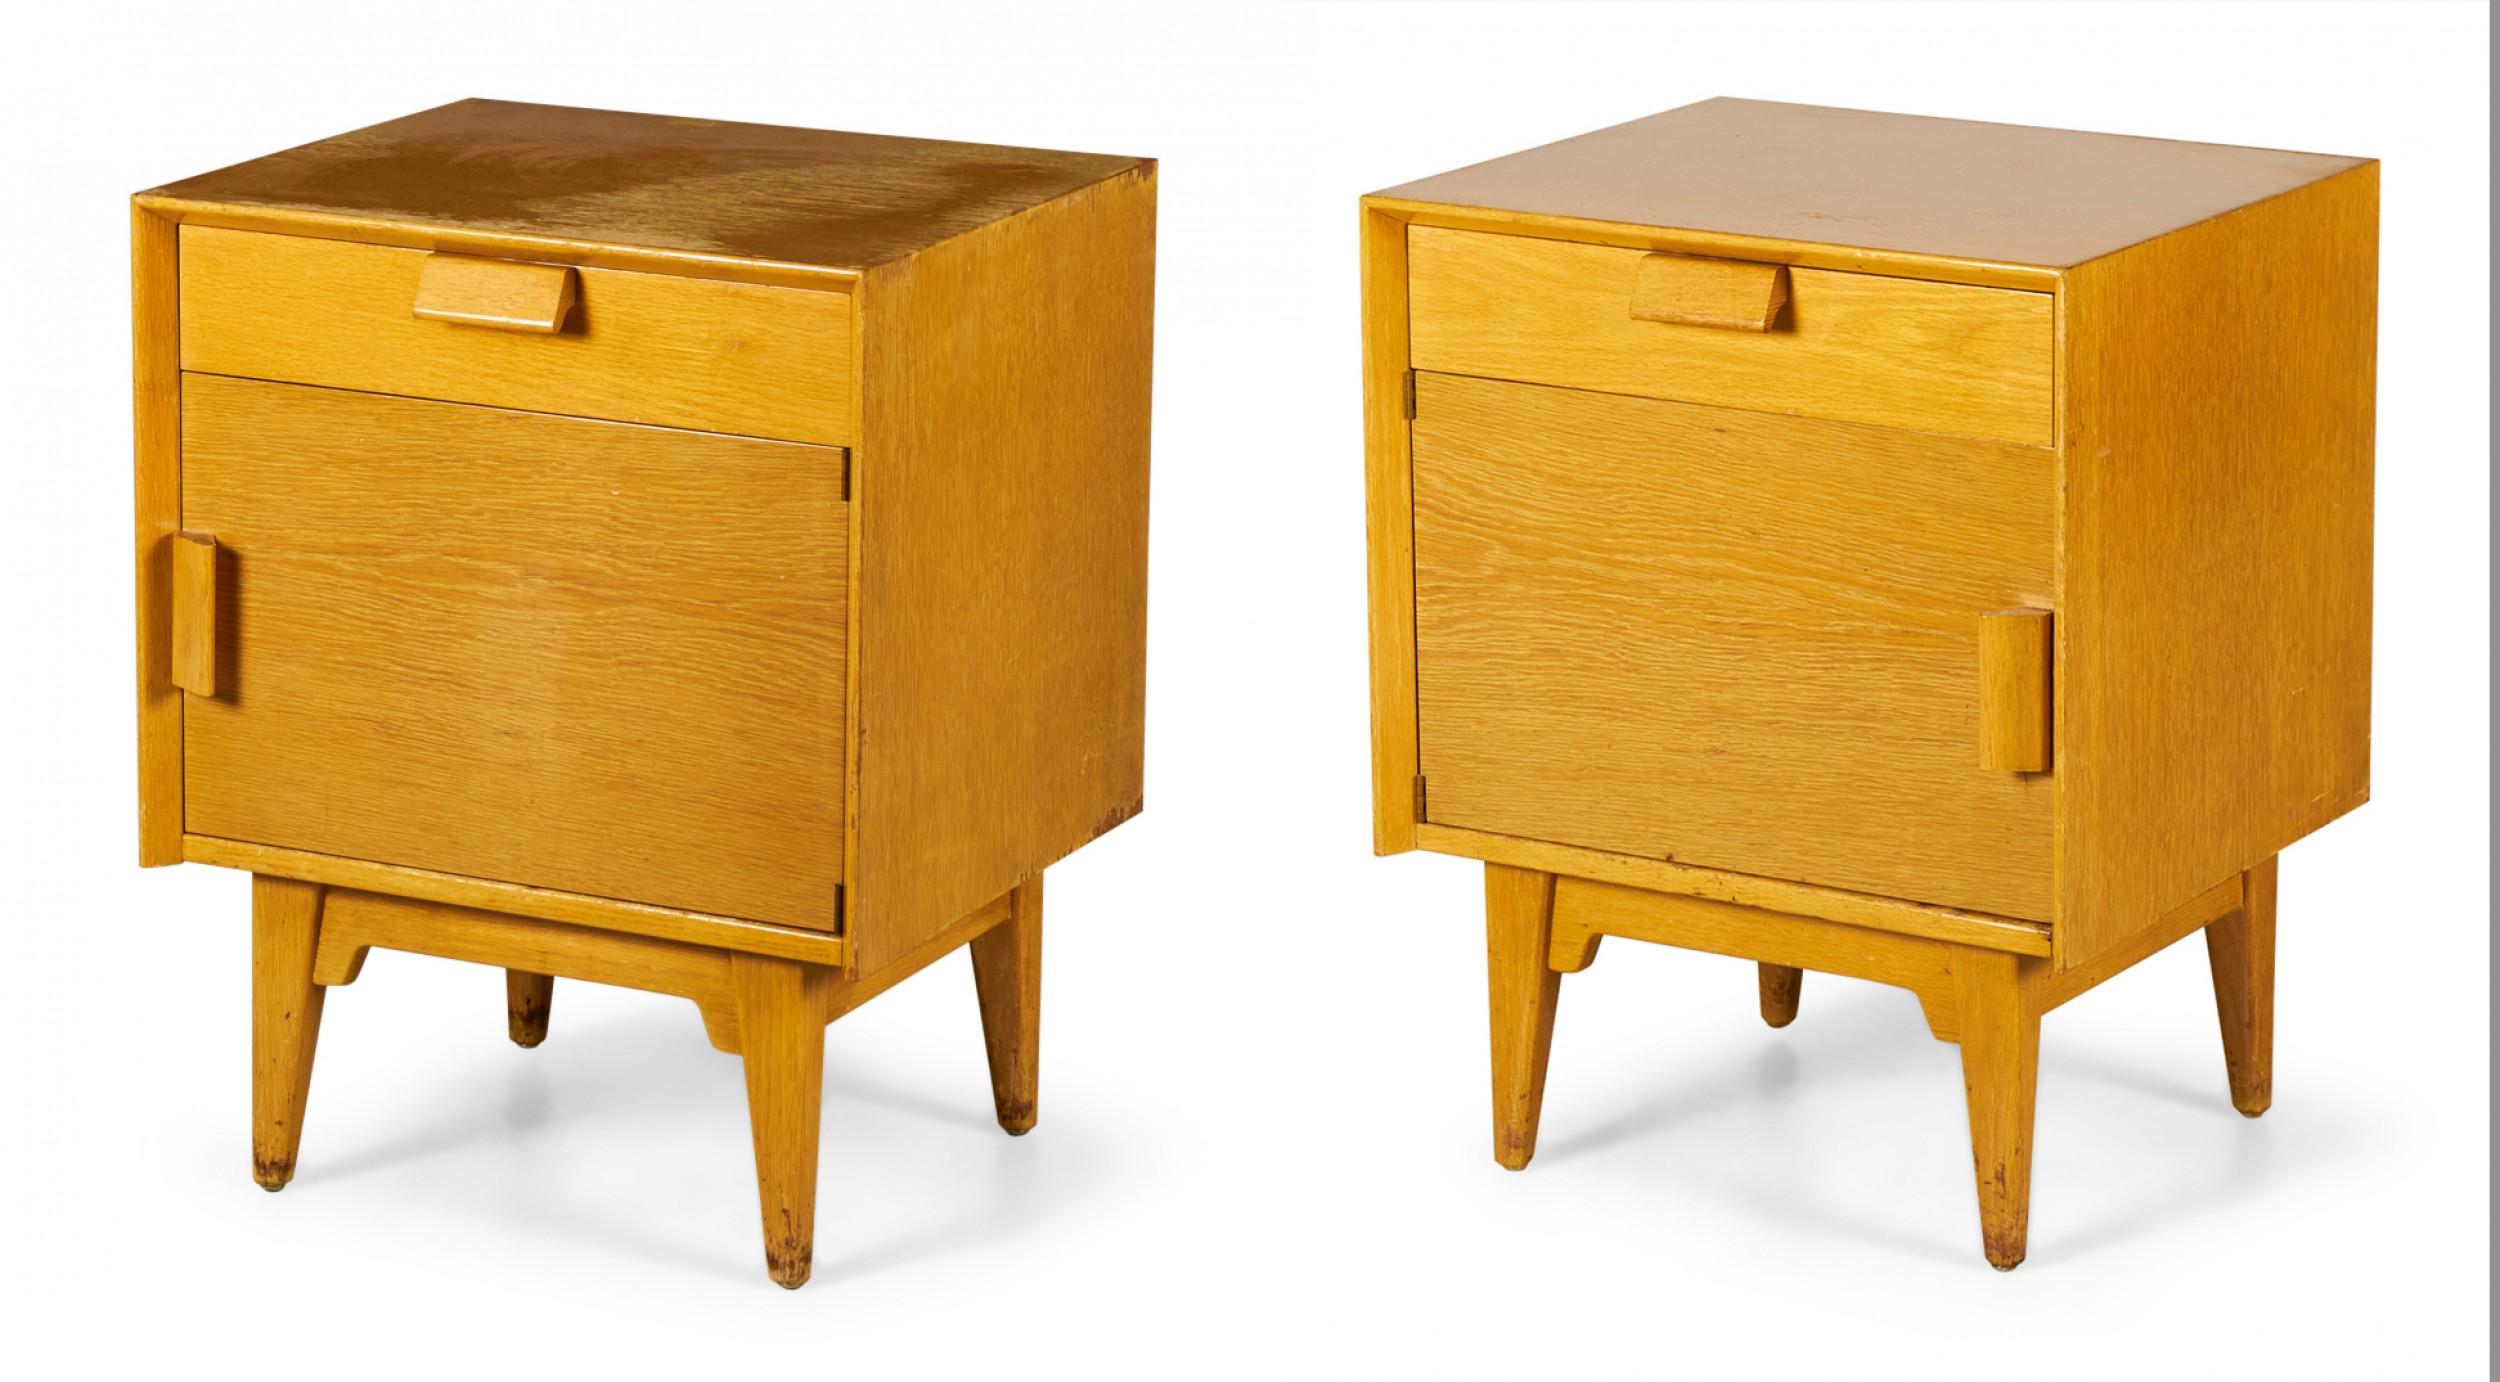 PAIR of Danish Mid-Century blond oak bedside tables / commodes with a single upper drawer above a cabinet compartment with angled wooden drawer pulls resting on four tapered wooden legs. (JENS RISOM)(PRICED AS PAIR)
